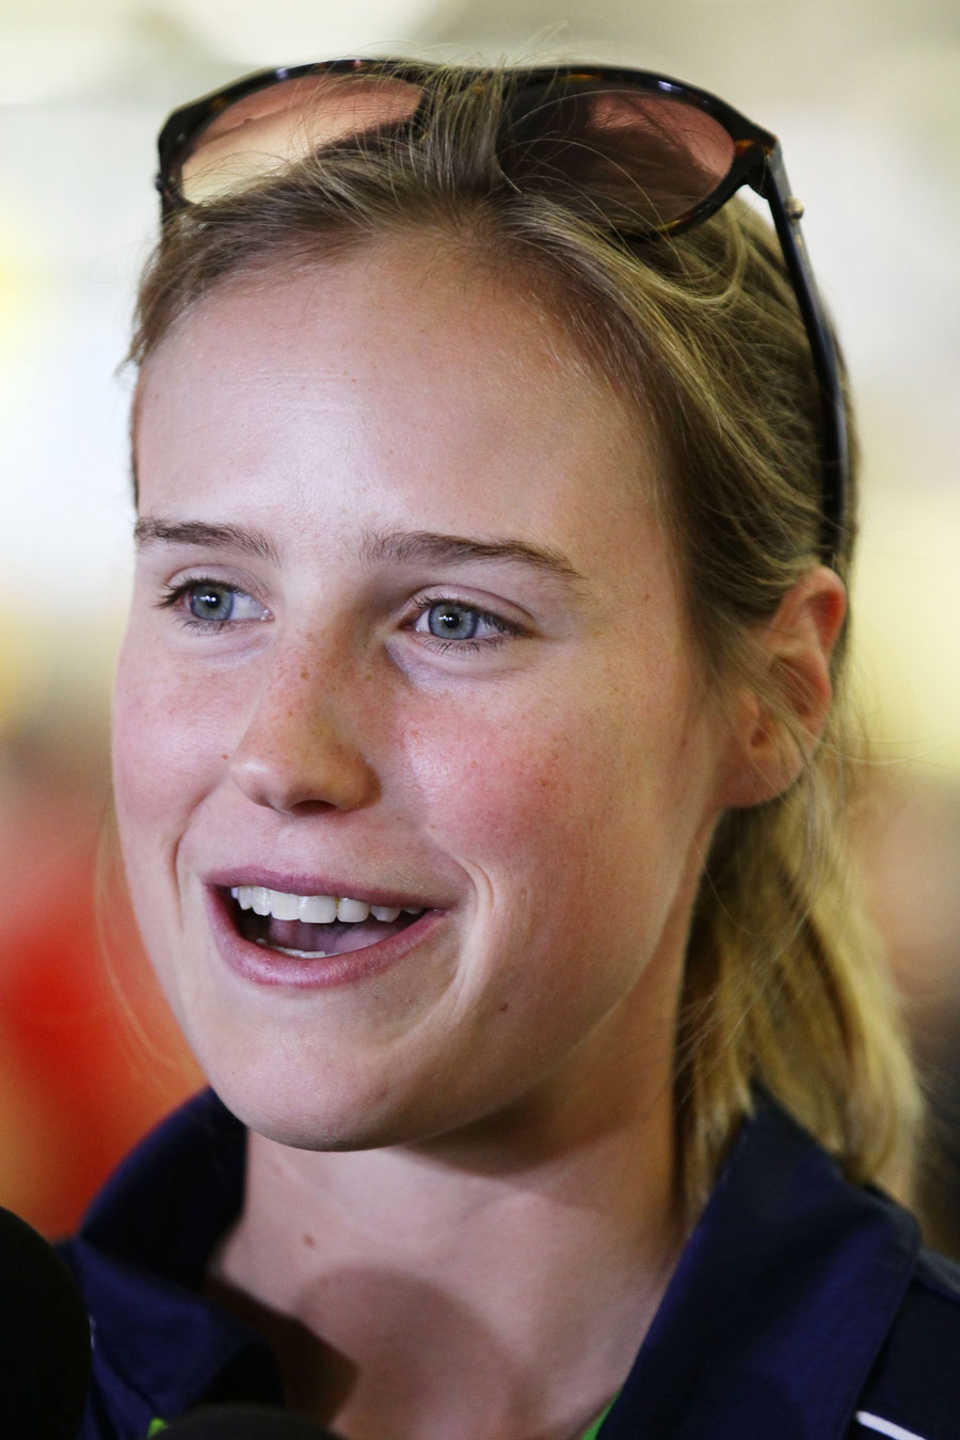 Australia's Ellyse Perry is all smiles after returning home from a victorious World Cup campaign